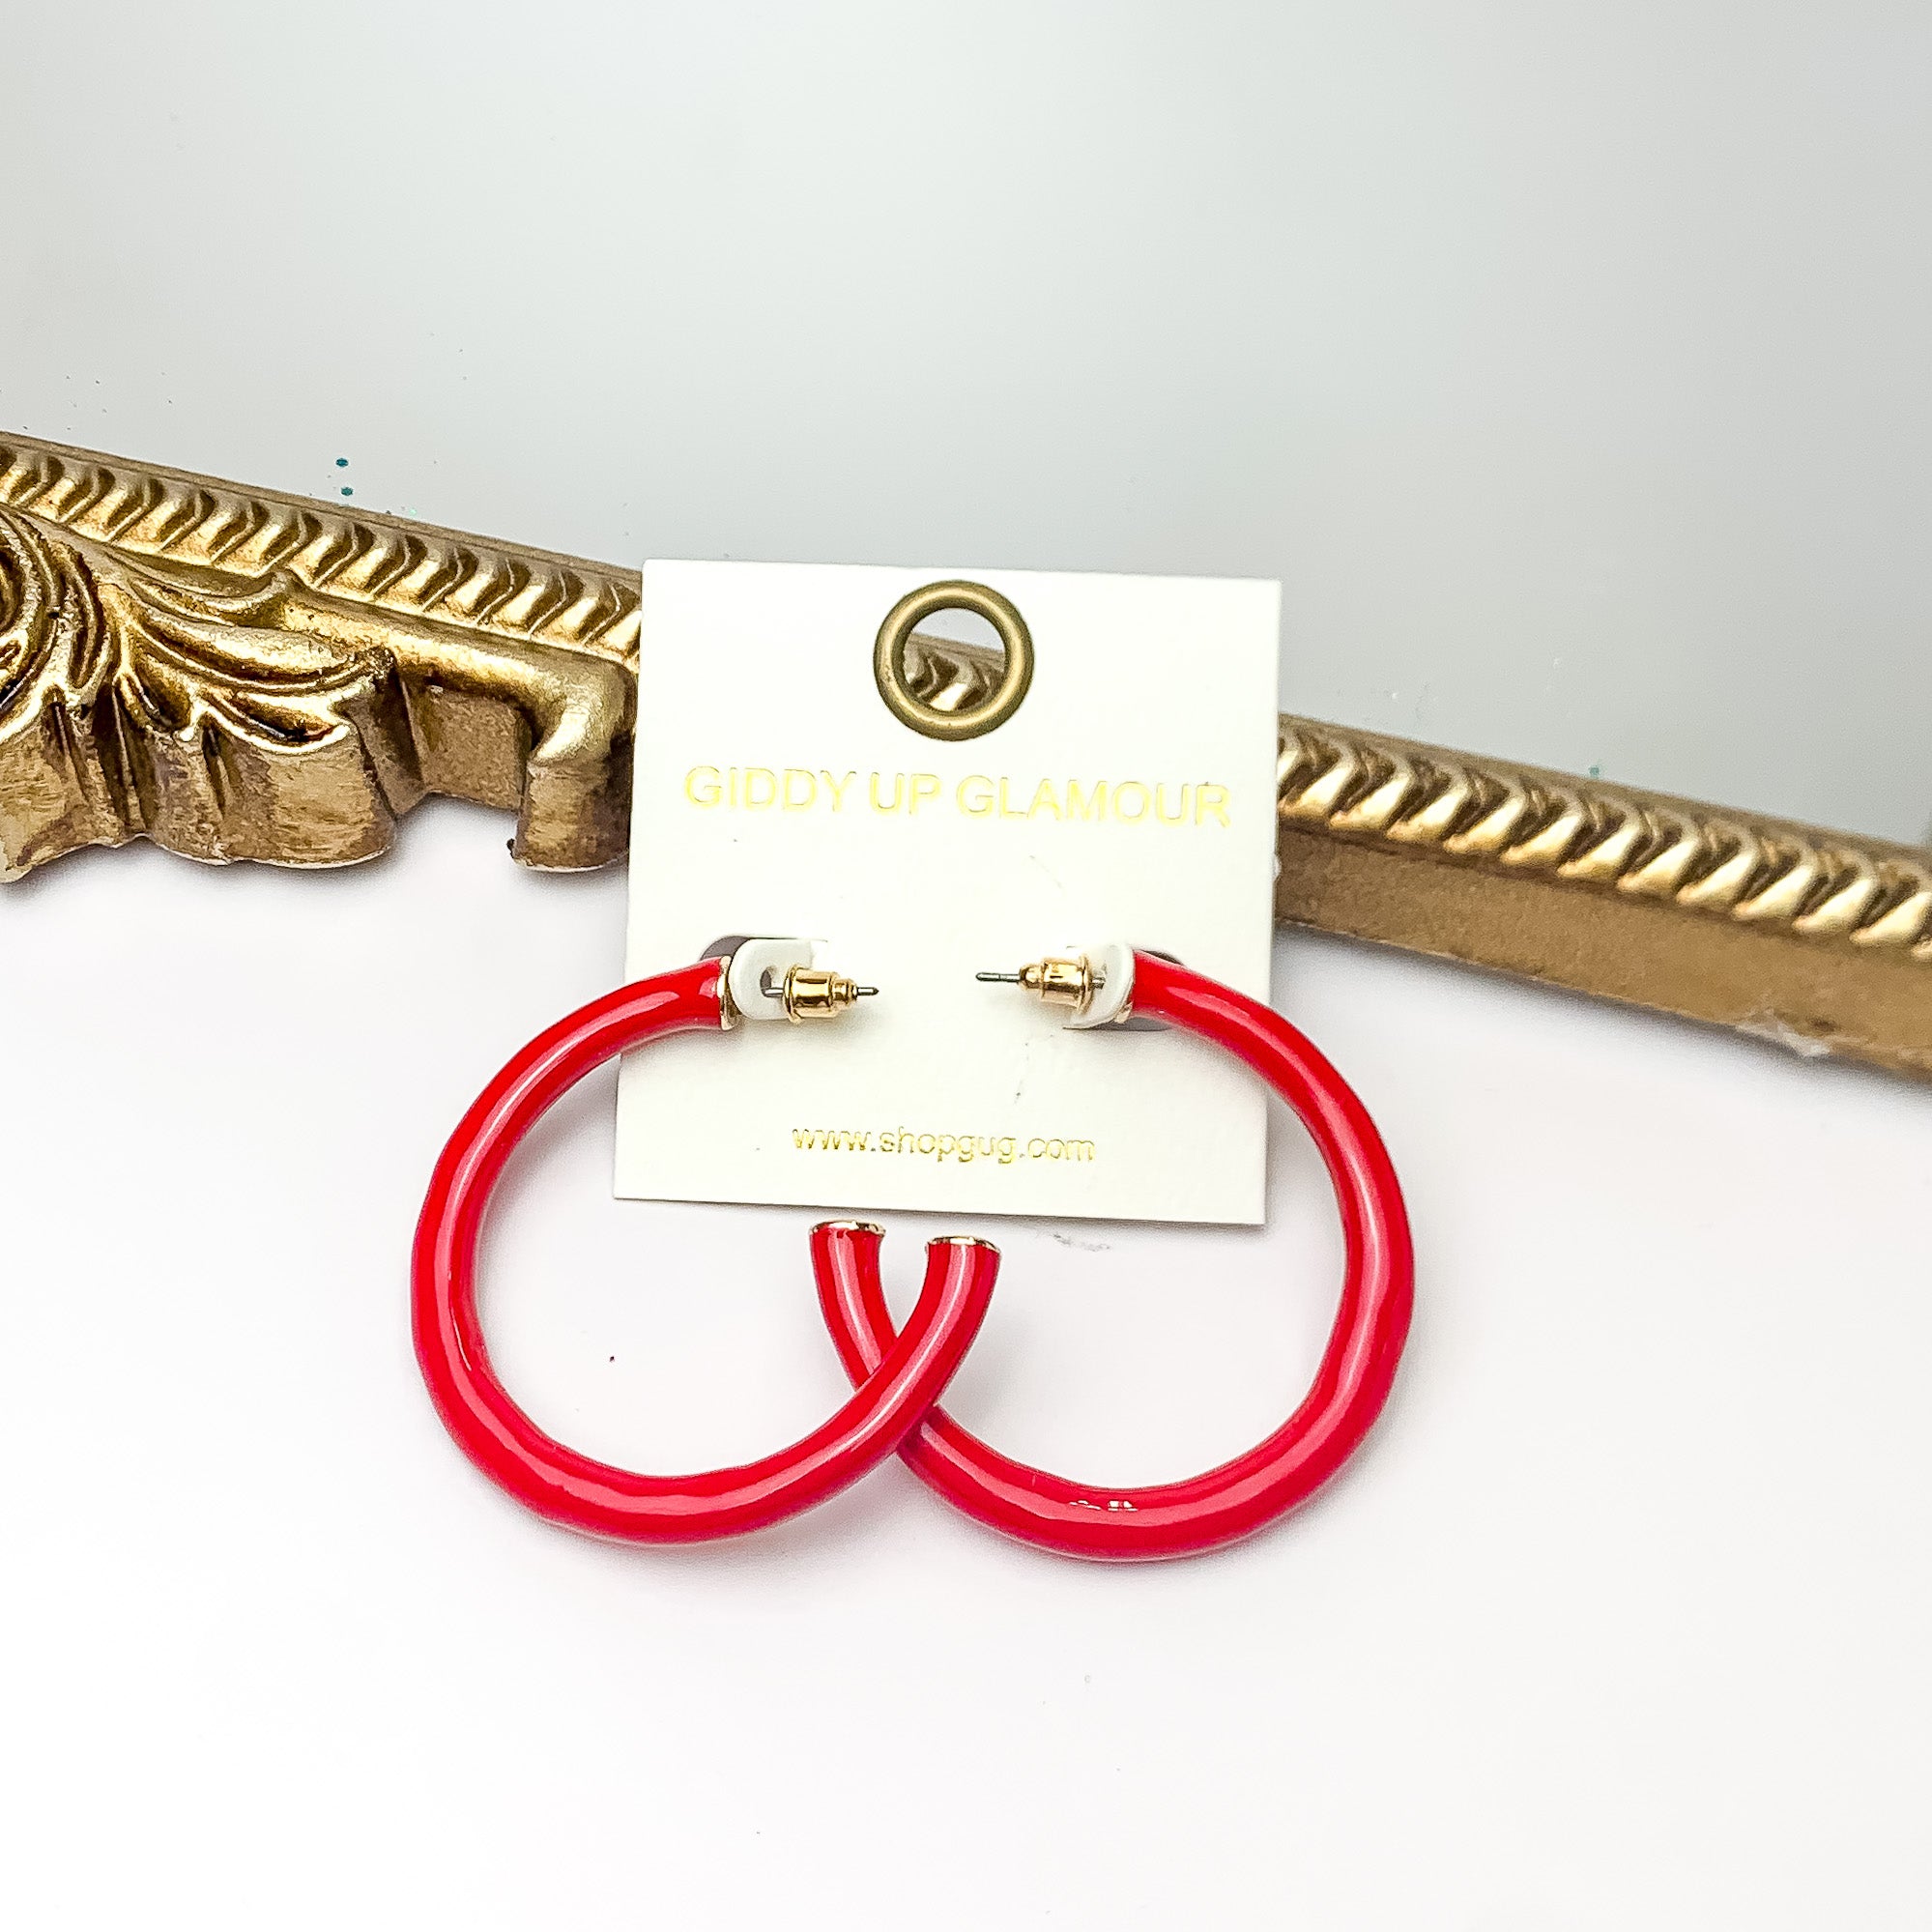 Plan For Cabo Large Hoop Earrings in Red. Pictured on a white background with a gold frame behind the earrings.